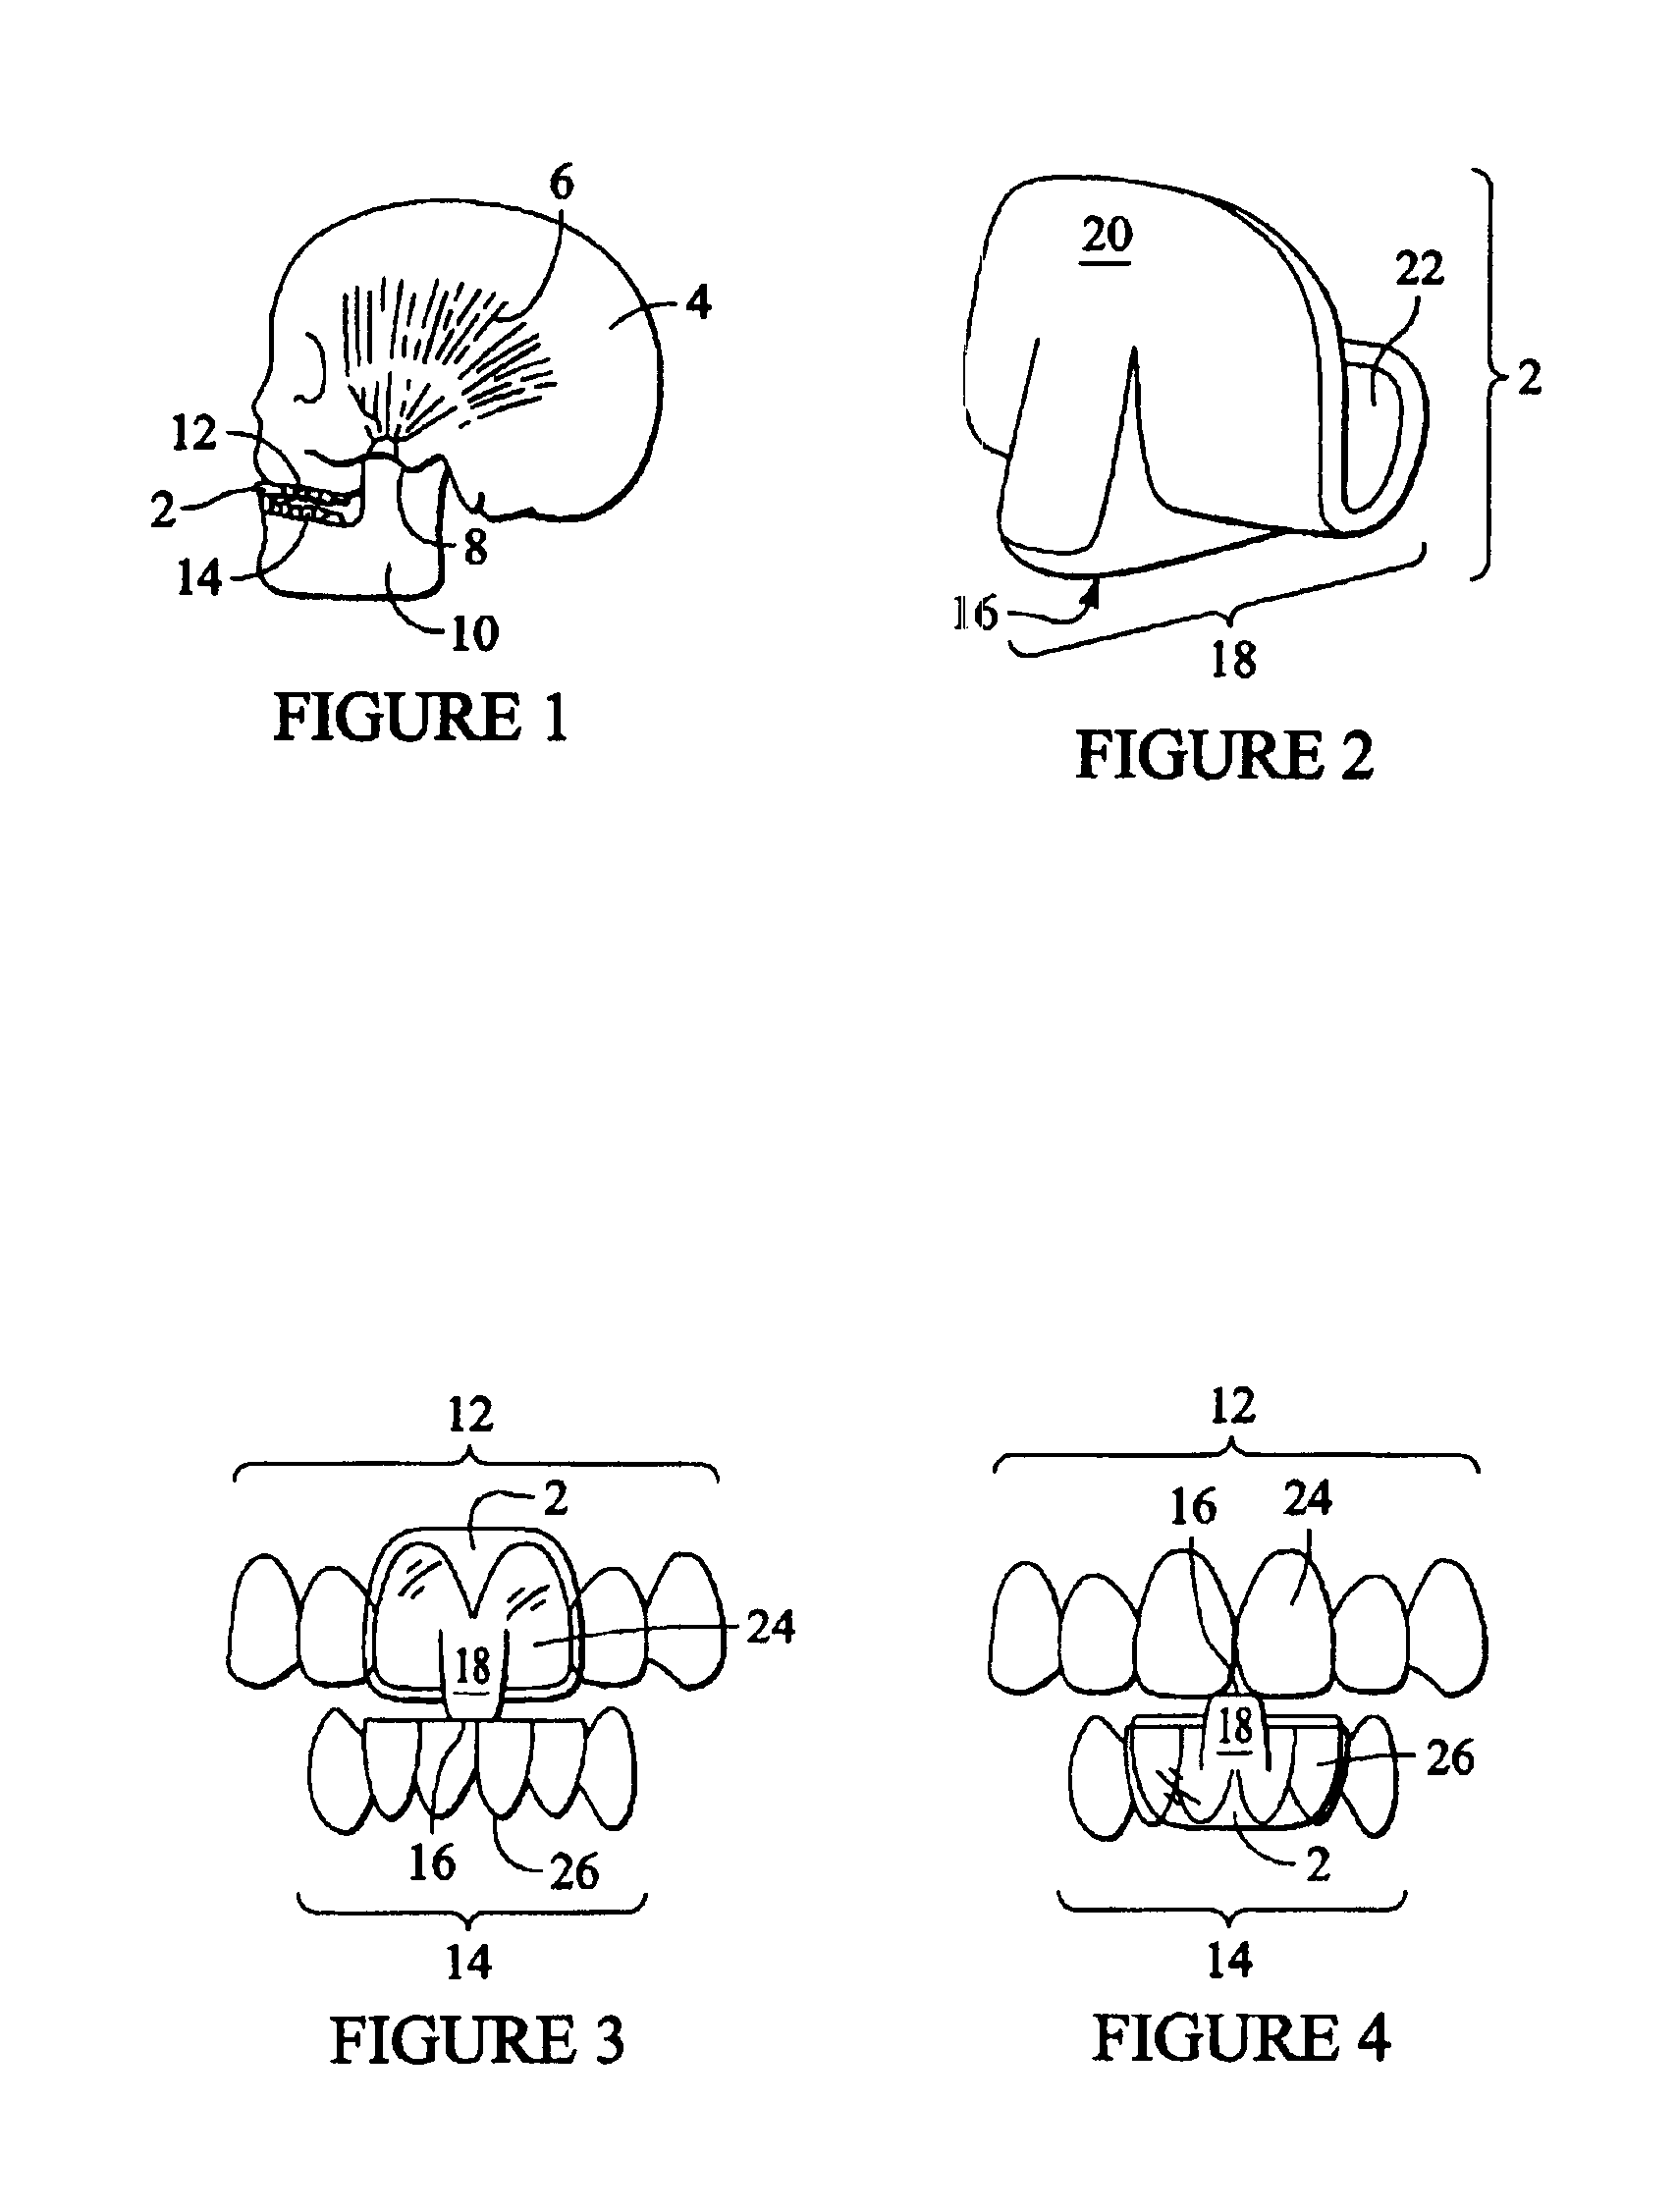 Intraoral discluder device and method for preventing migraine and tension headaches and temporomandibular disorders